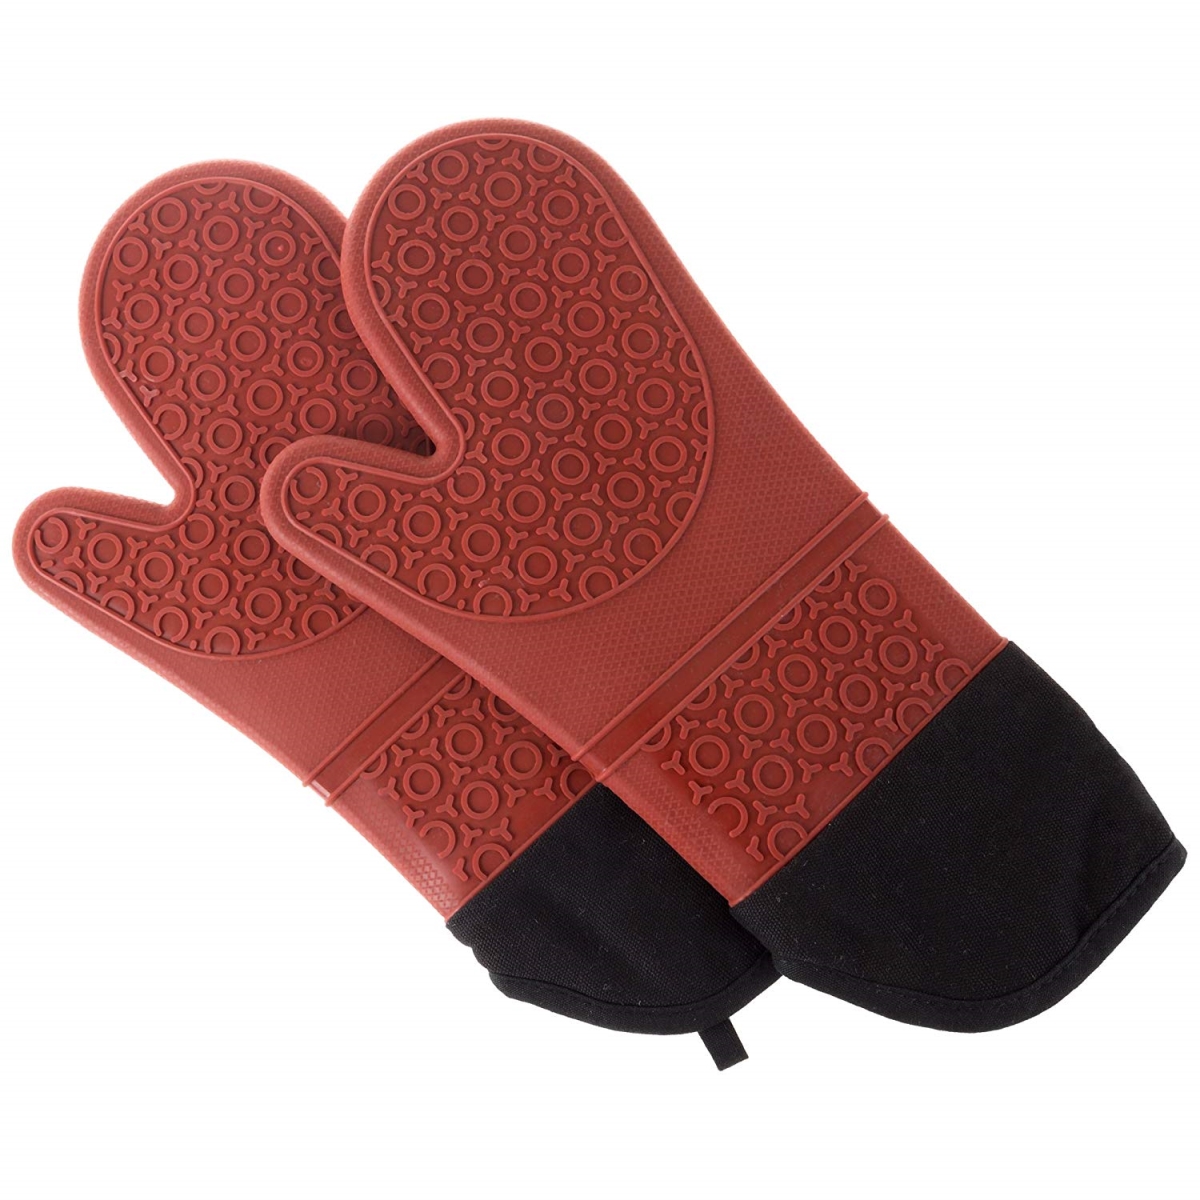 69a-64438 Silicone Oven Mitts - Dark Red